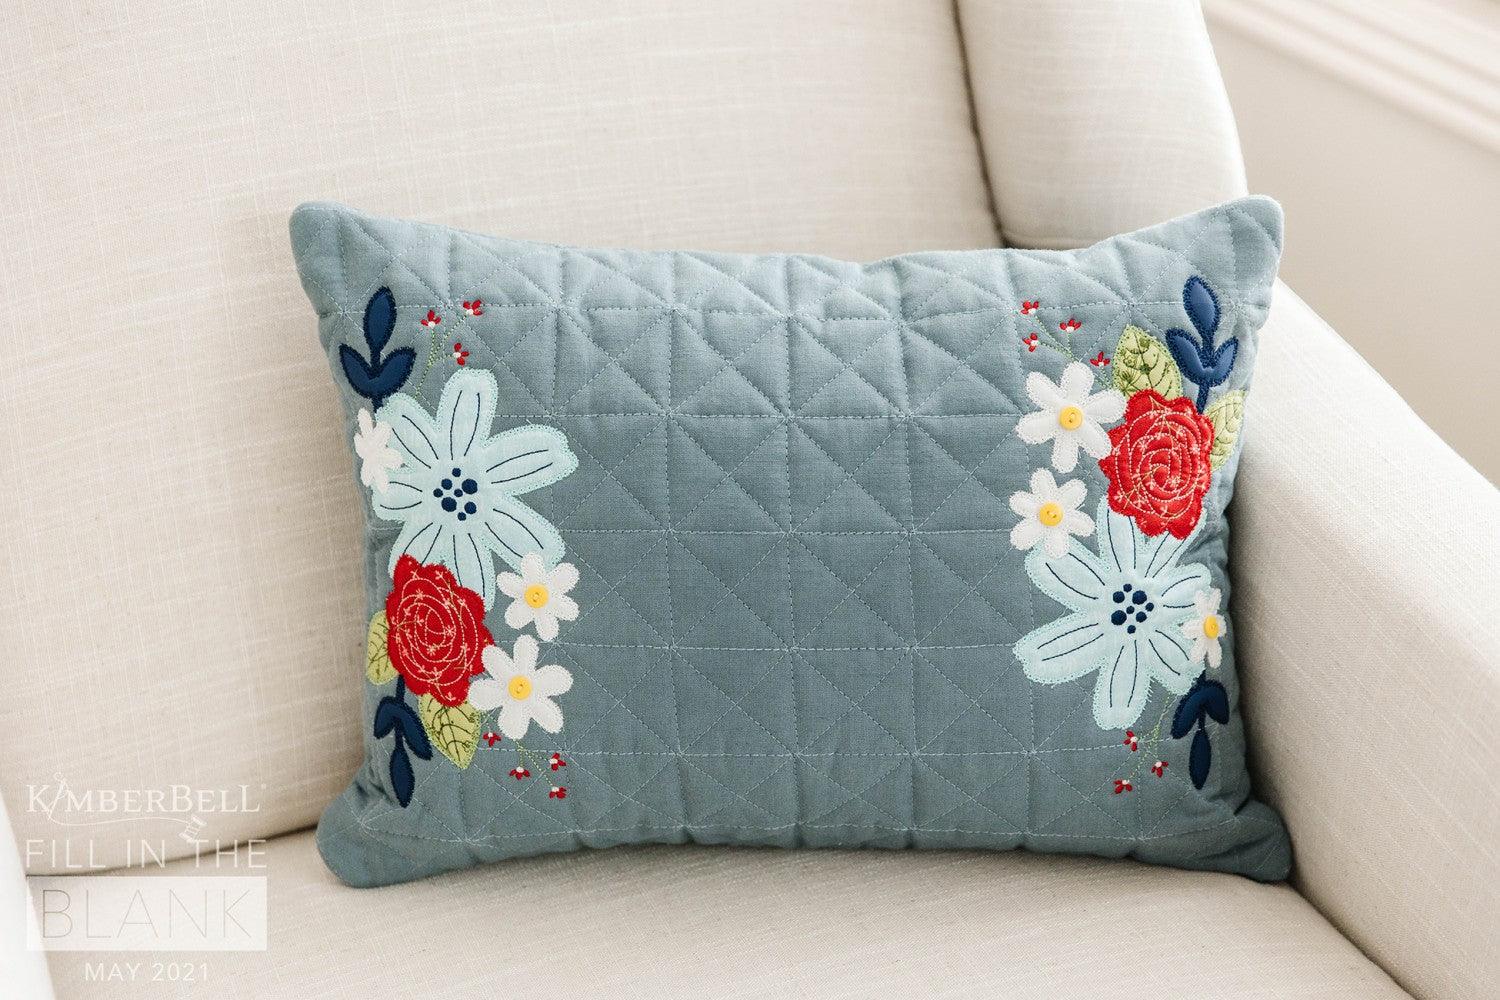 Kimberbell Fill in The Blank - July: Quilted Pillow Cover Blank - Kawartha Quilting and Sewing LTD.